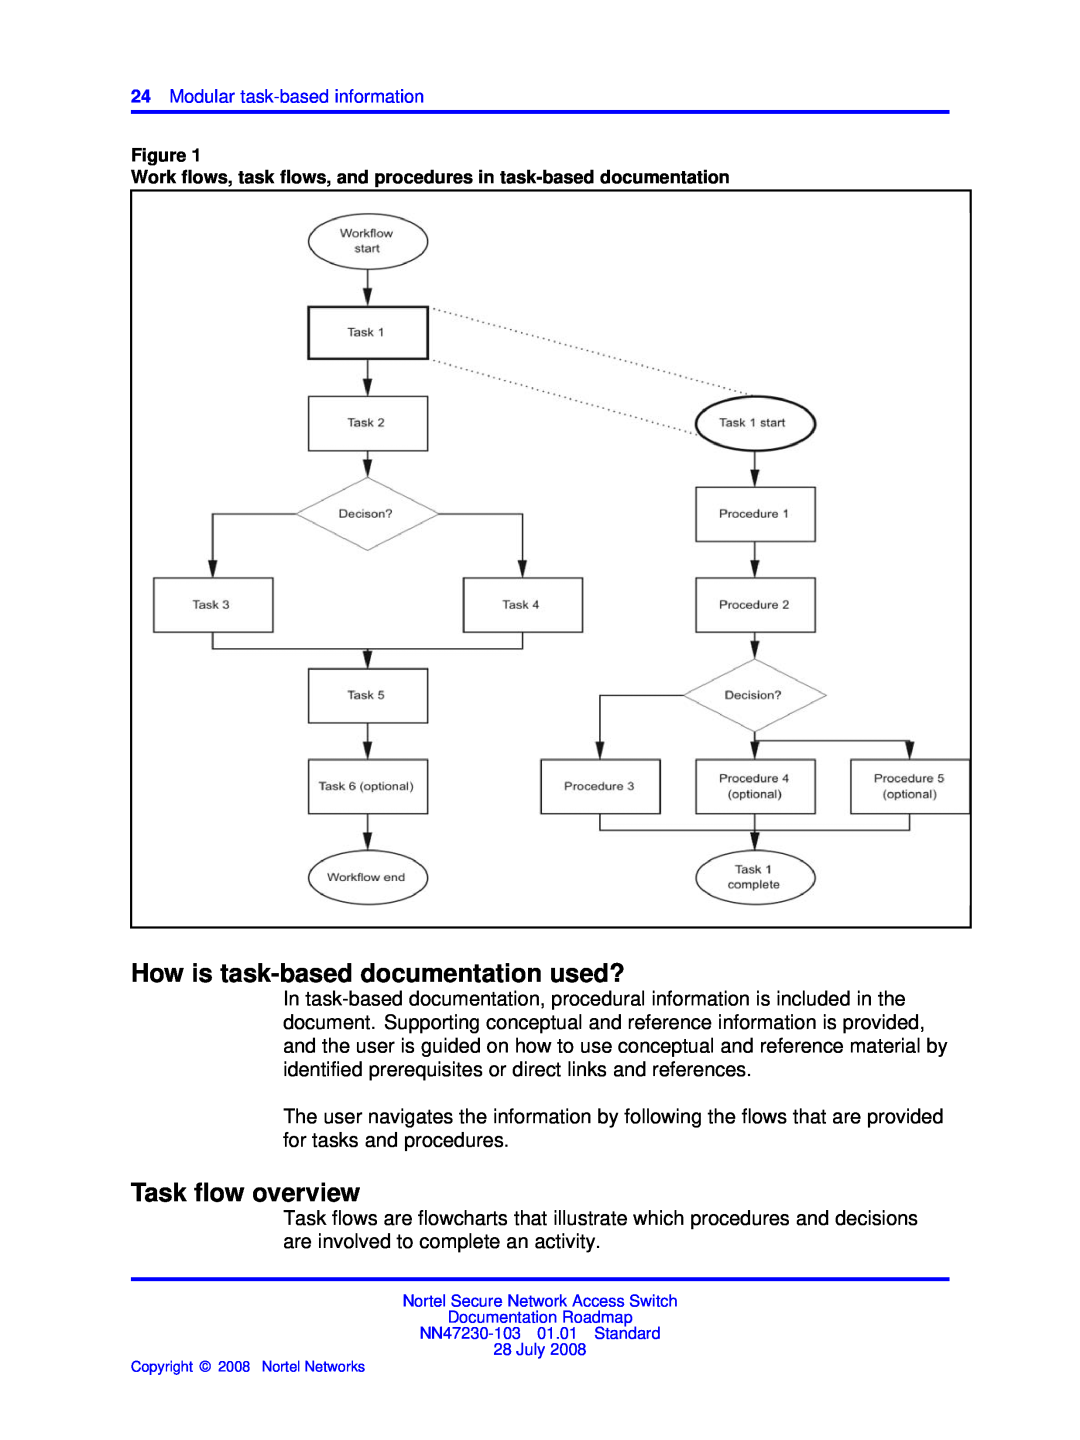 Nortel Networks NN47230-103 manual How is task-based documentation used?, Task ﬂow overview 